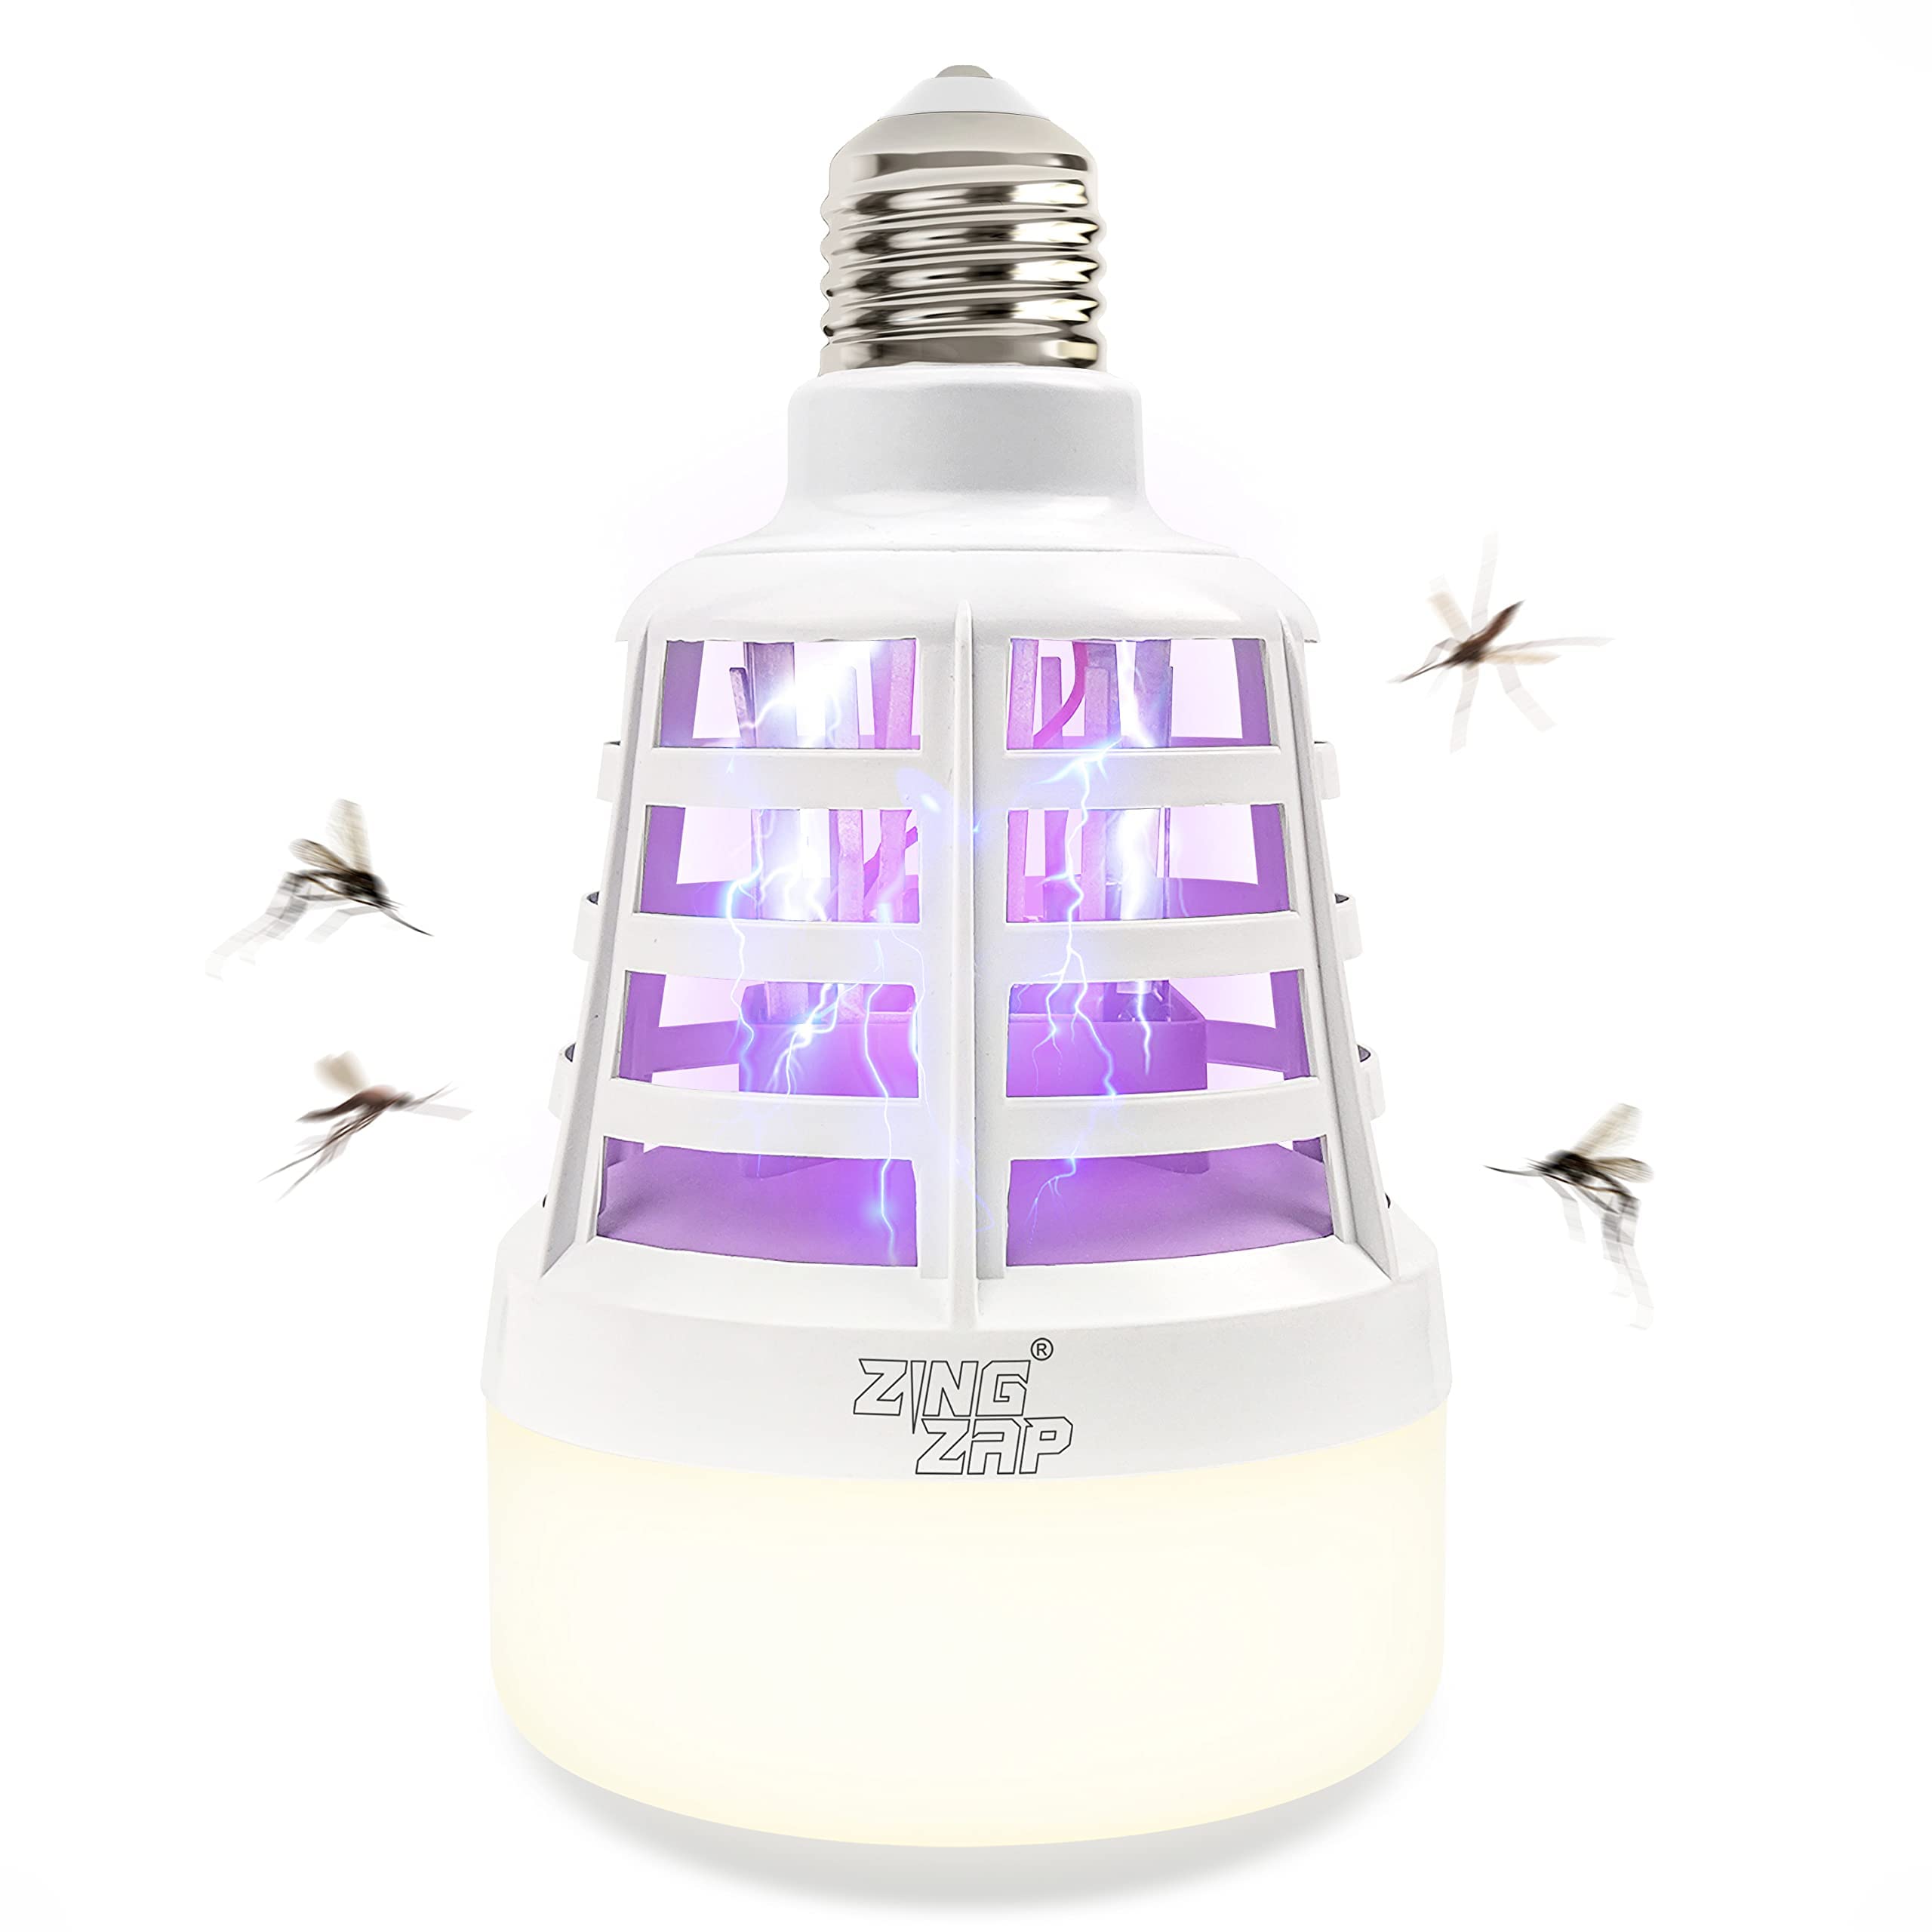 Southern California mosquito problem?? Here is a BLACK+DECKER Bug Zapp, Mosquito Repellent